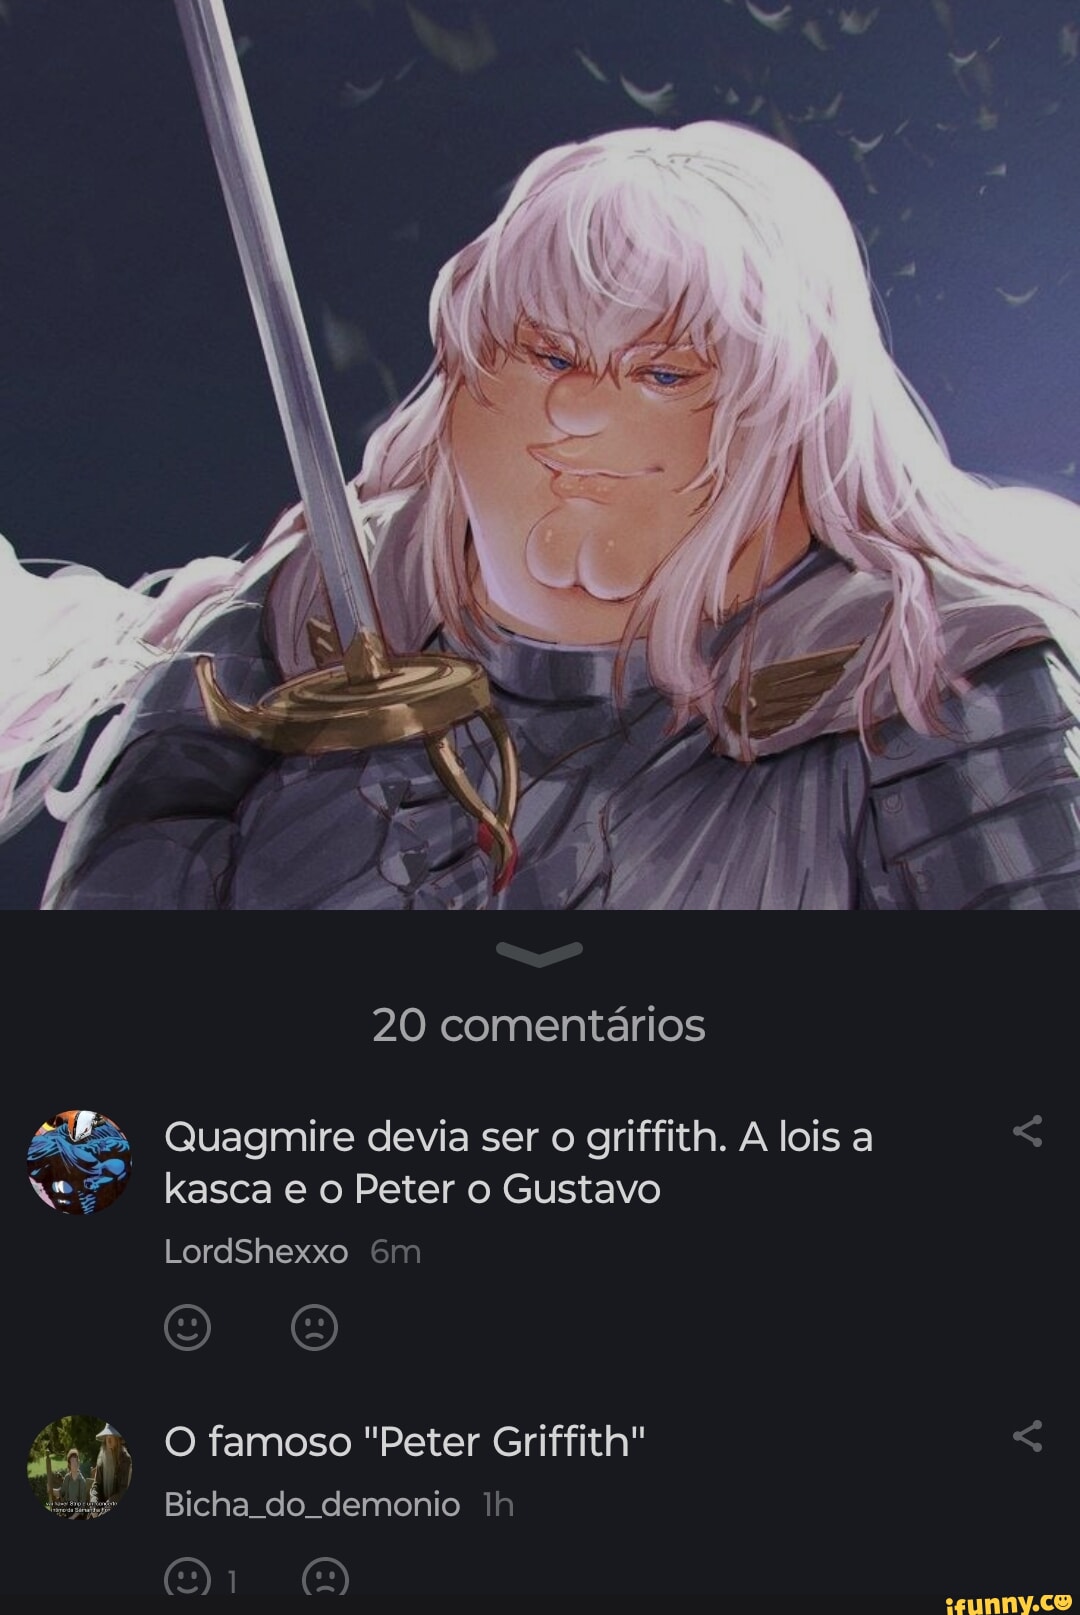 Griffith, Minecraft gratis na Play store! - iFunny Brazil